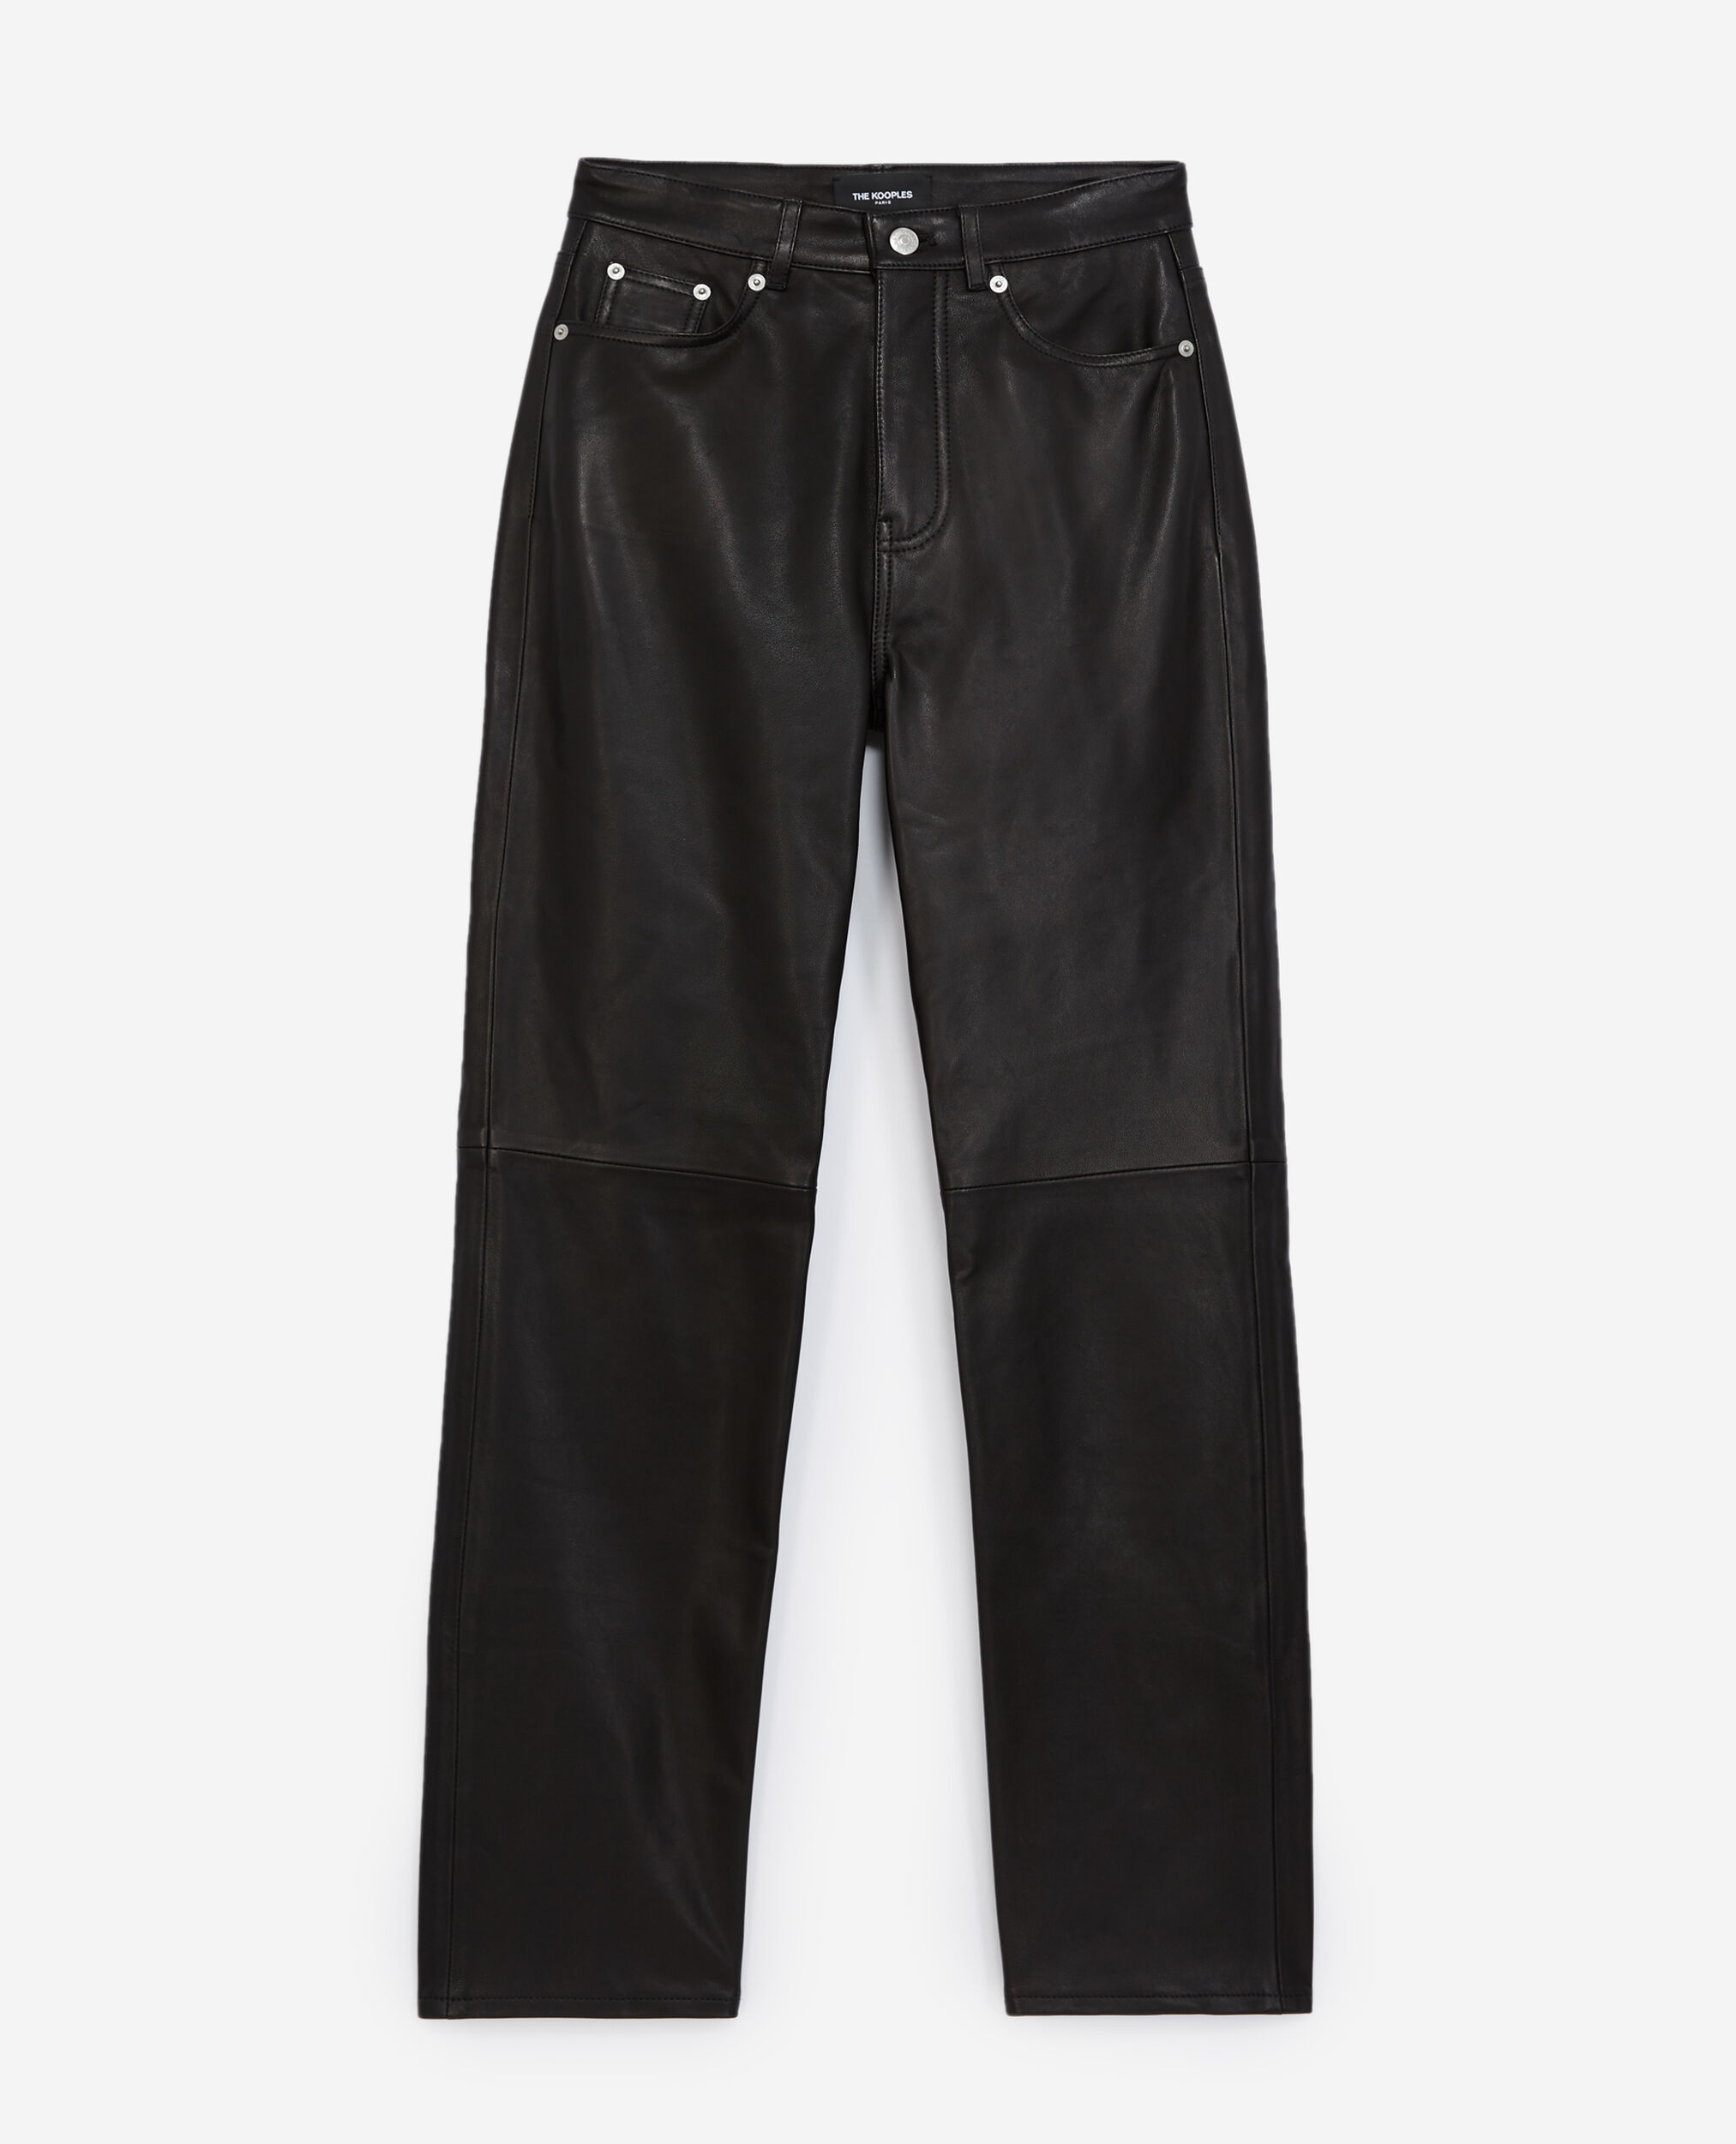 Straight black five pockets leather pants